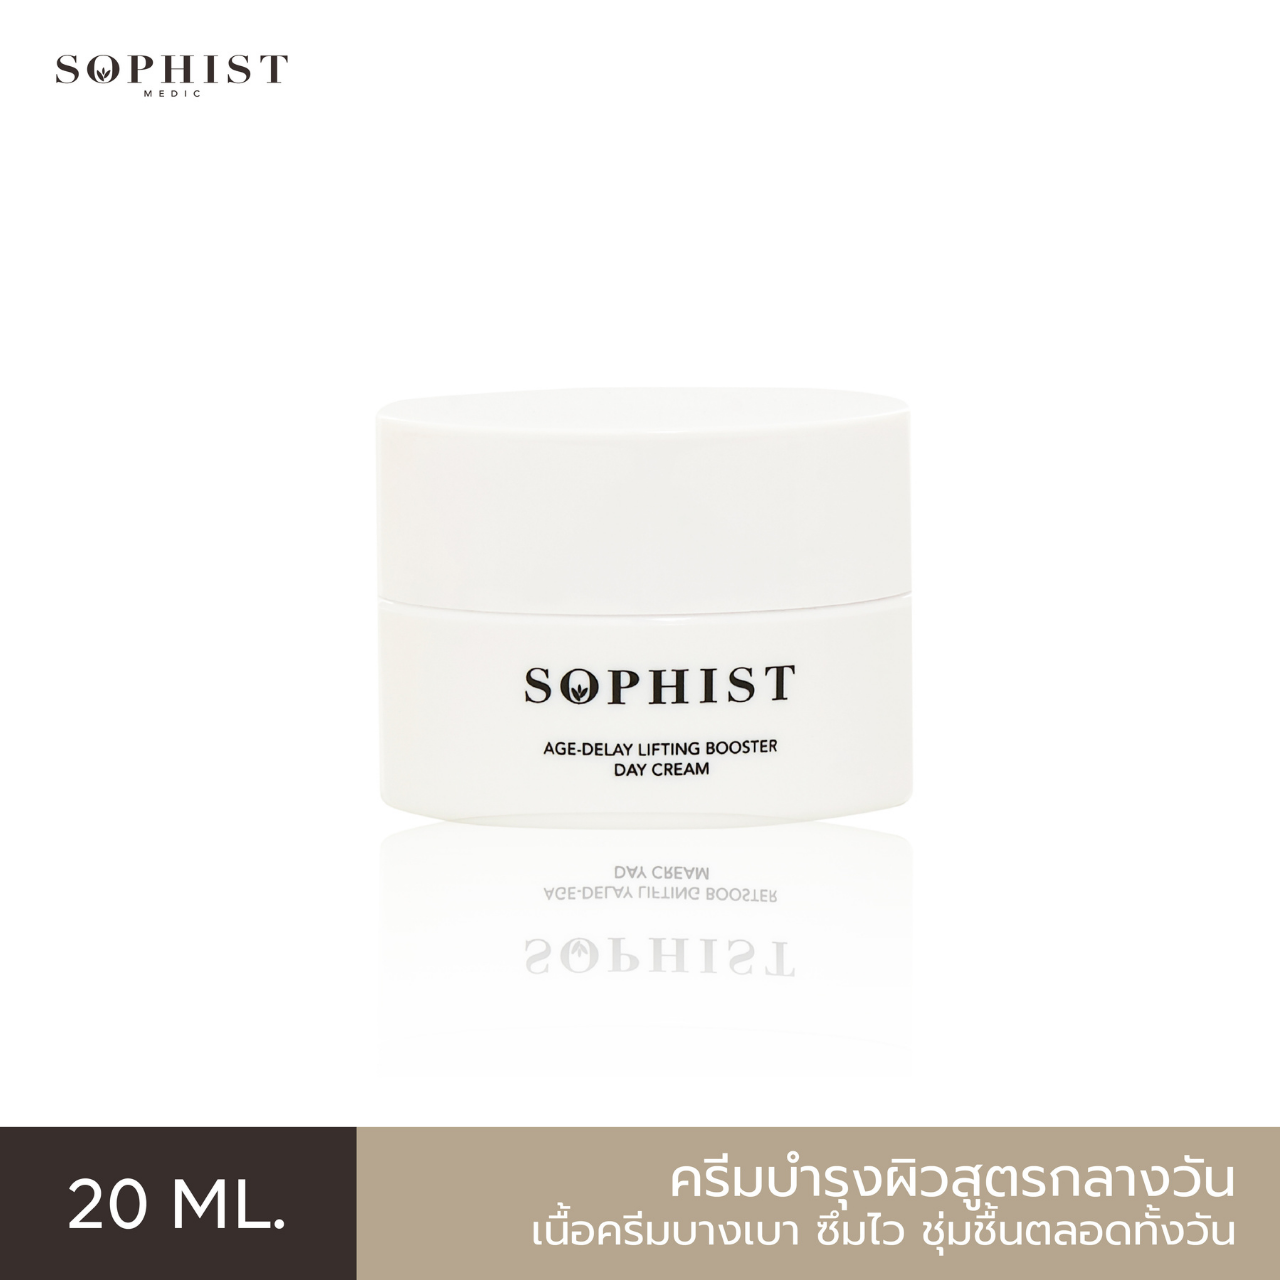 Sophist Age - Delay Red Lifting Booster Day Cream 20 ml.